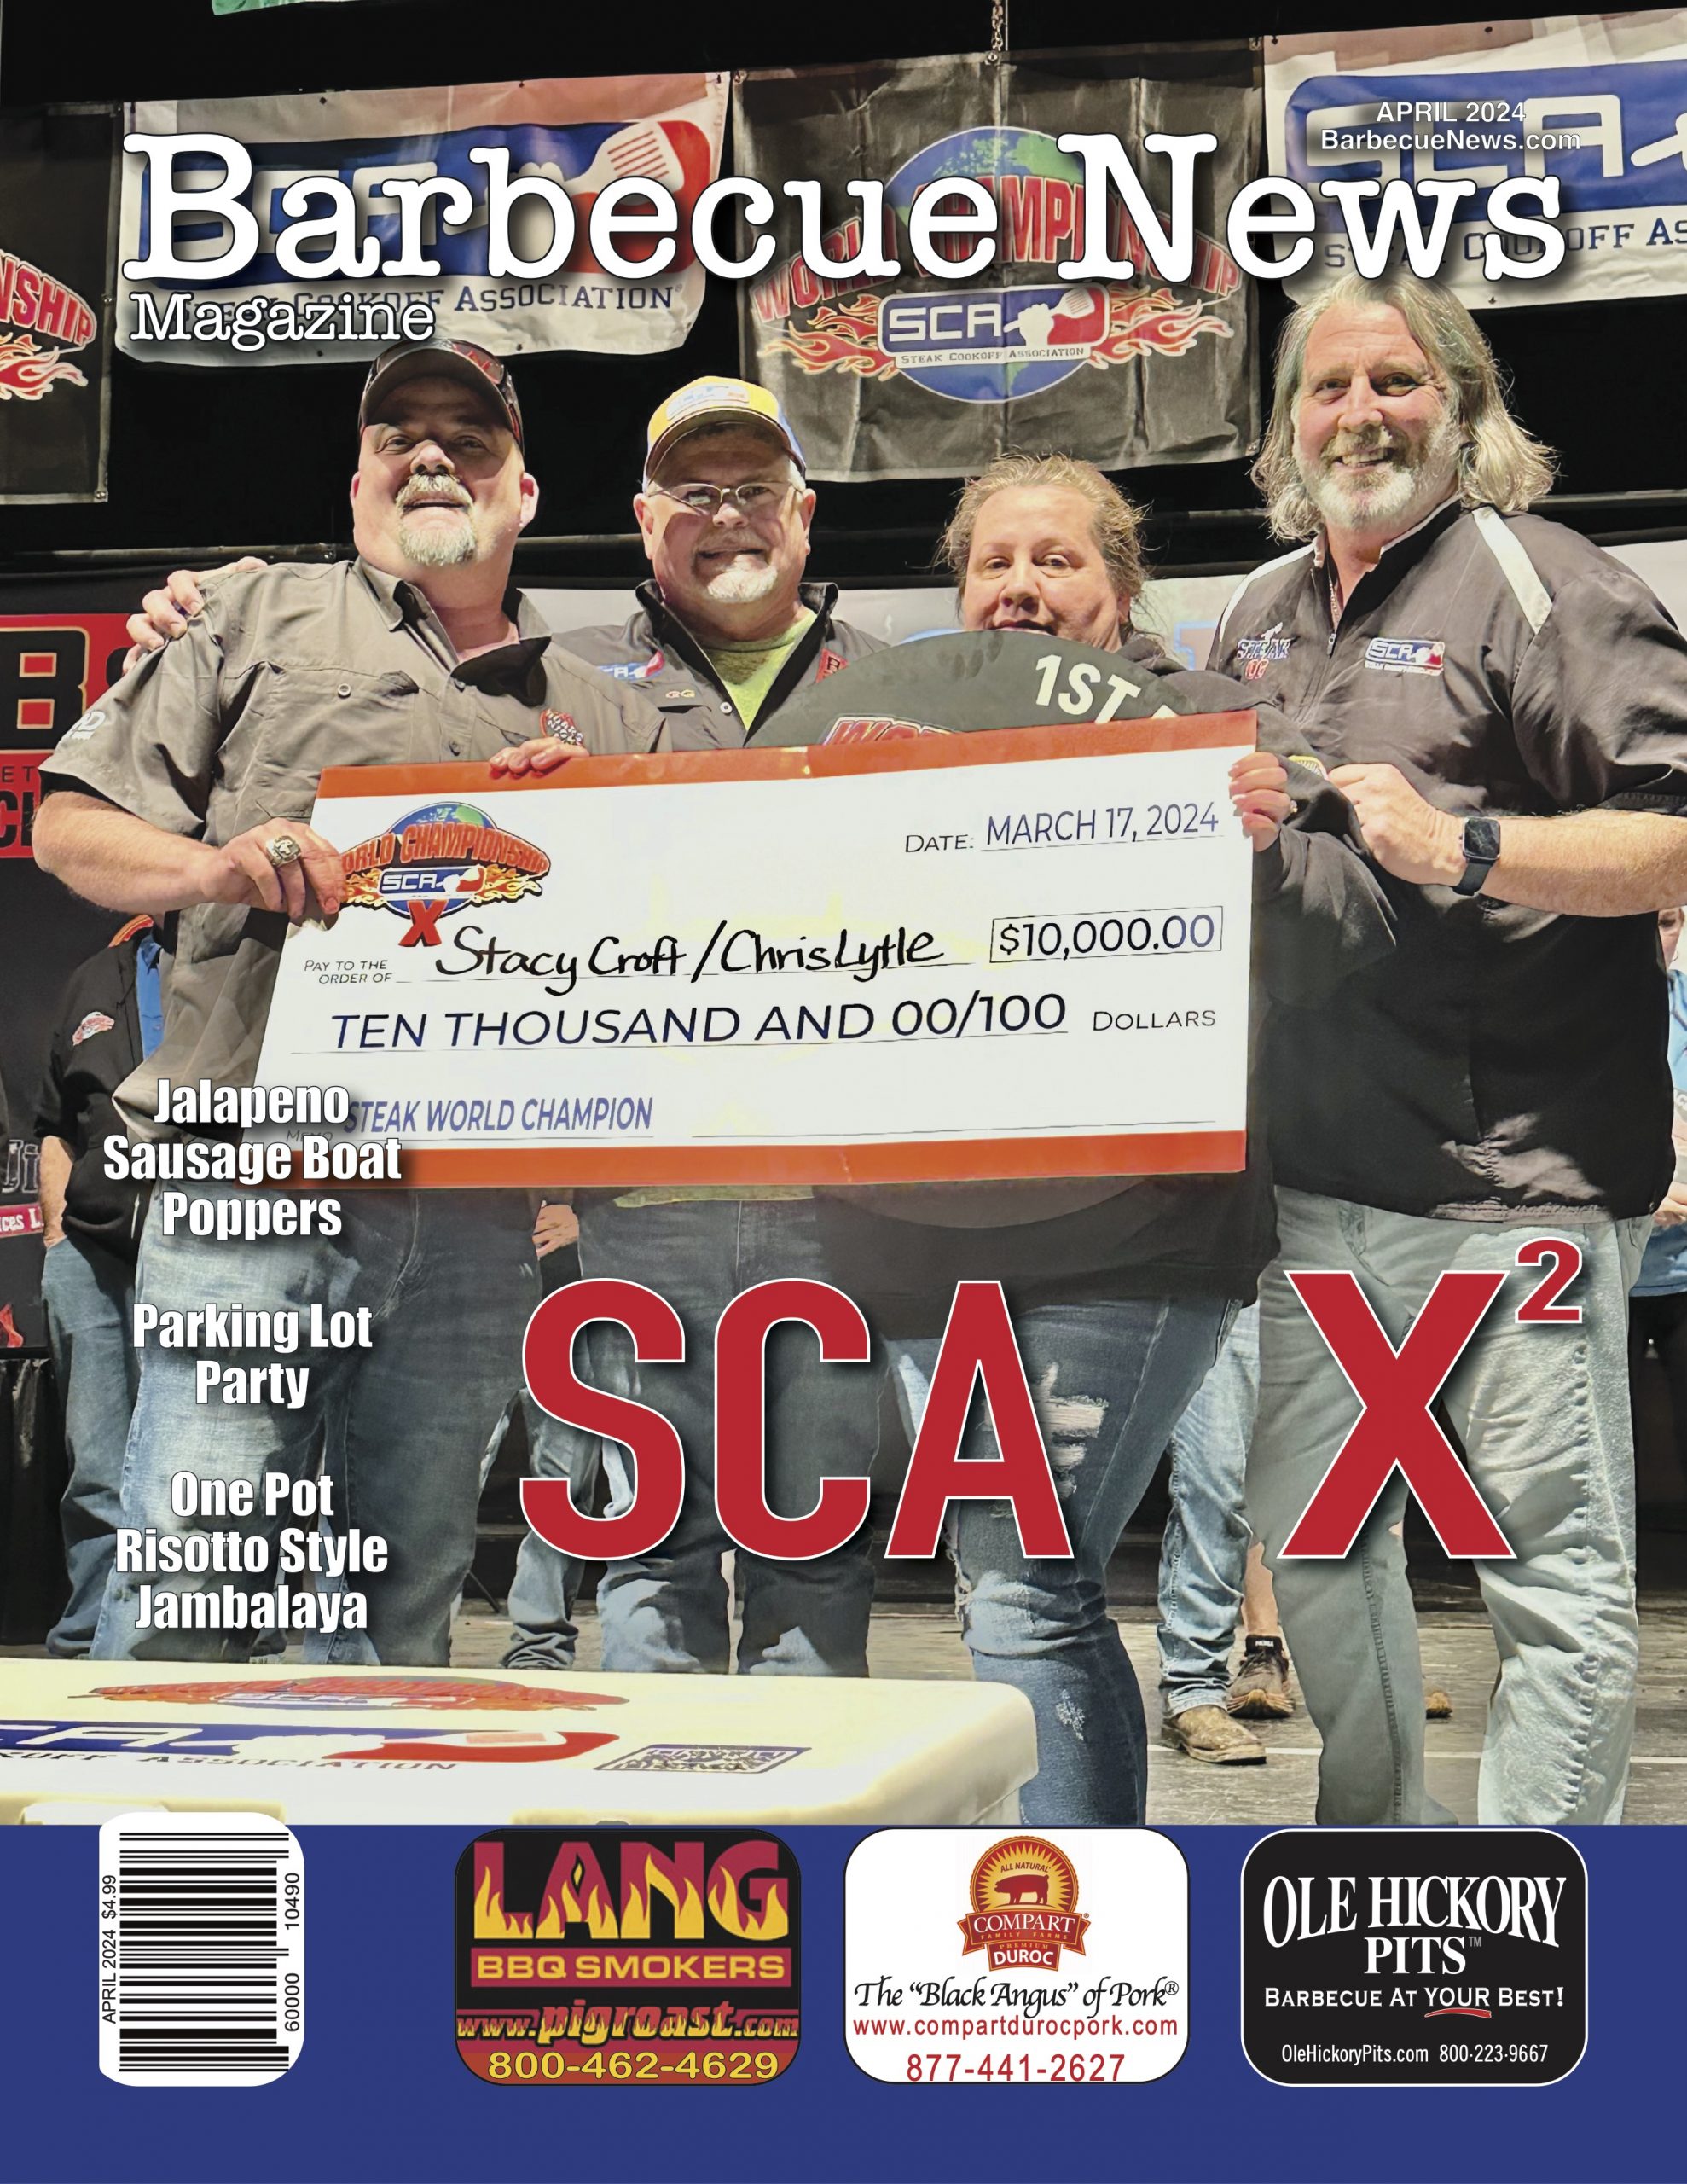 Barbecue News April Issue